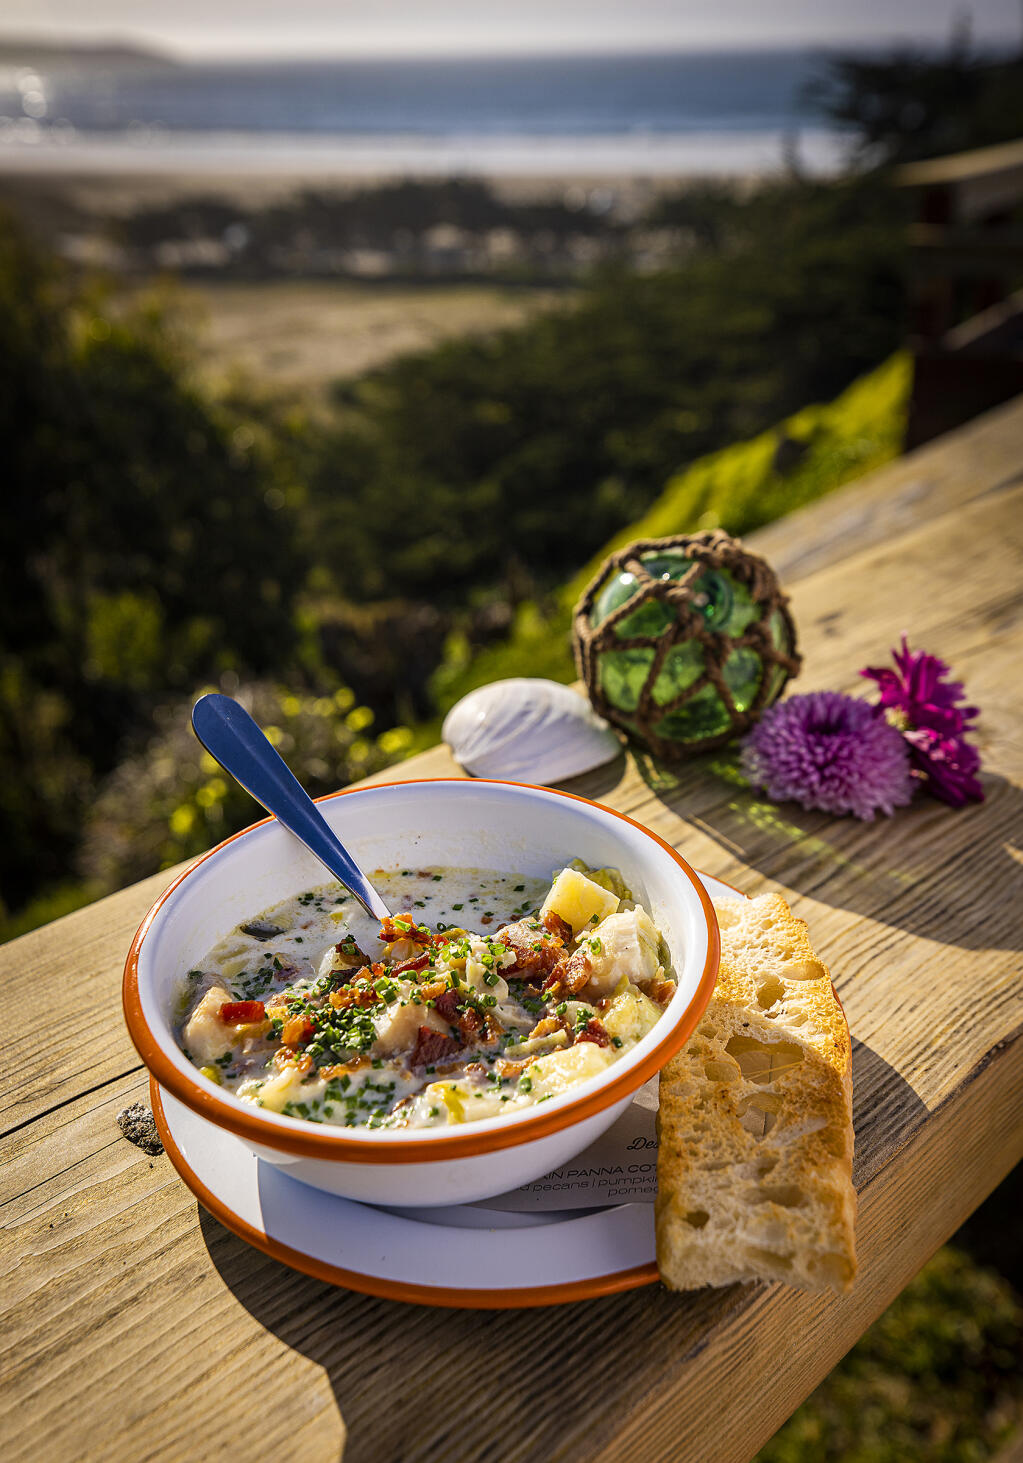 Coastal Kitchen chef Jennifer McMurry serves classic milk-based clam chowder with chopped clams, rock cod, potatoes and leeks garnished with bacon and chives with housemade focaccia and a view overlooking Dillon Beach. (John Burgess/The Press Democrat)